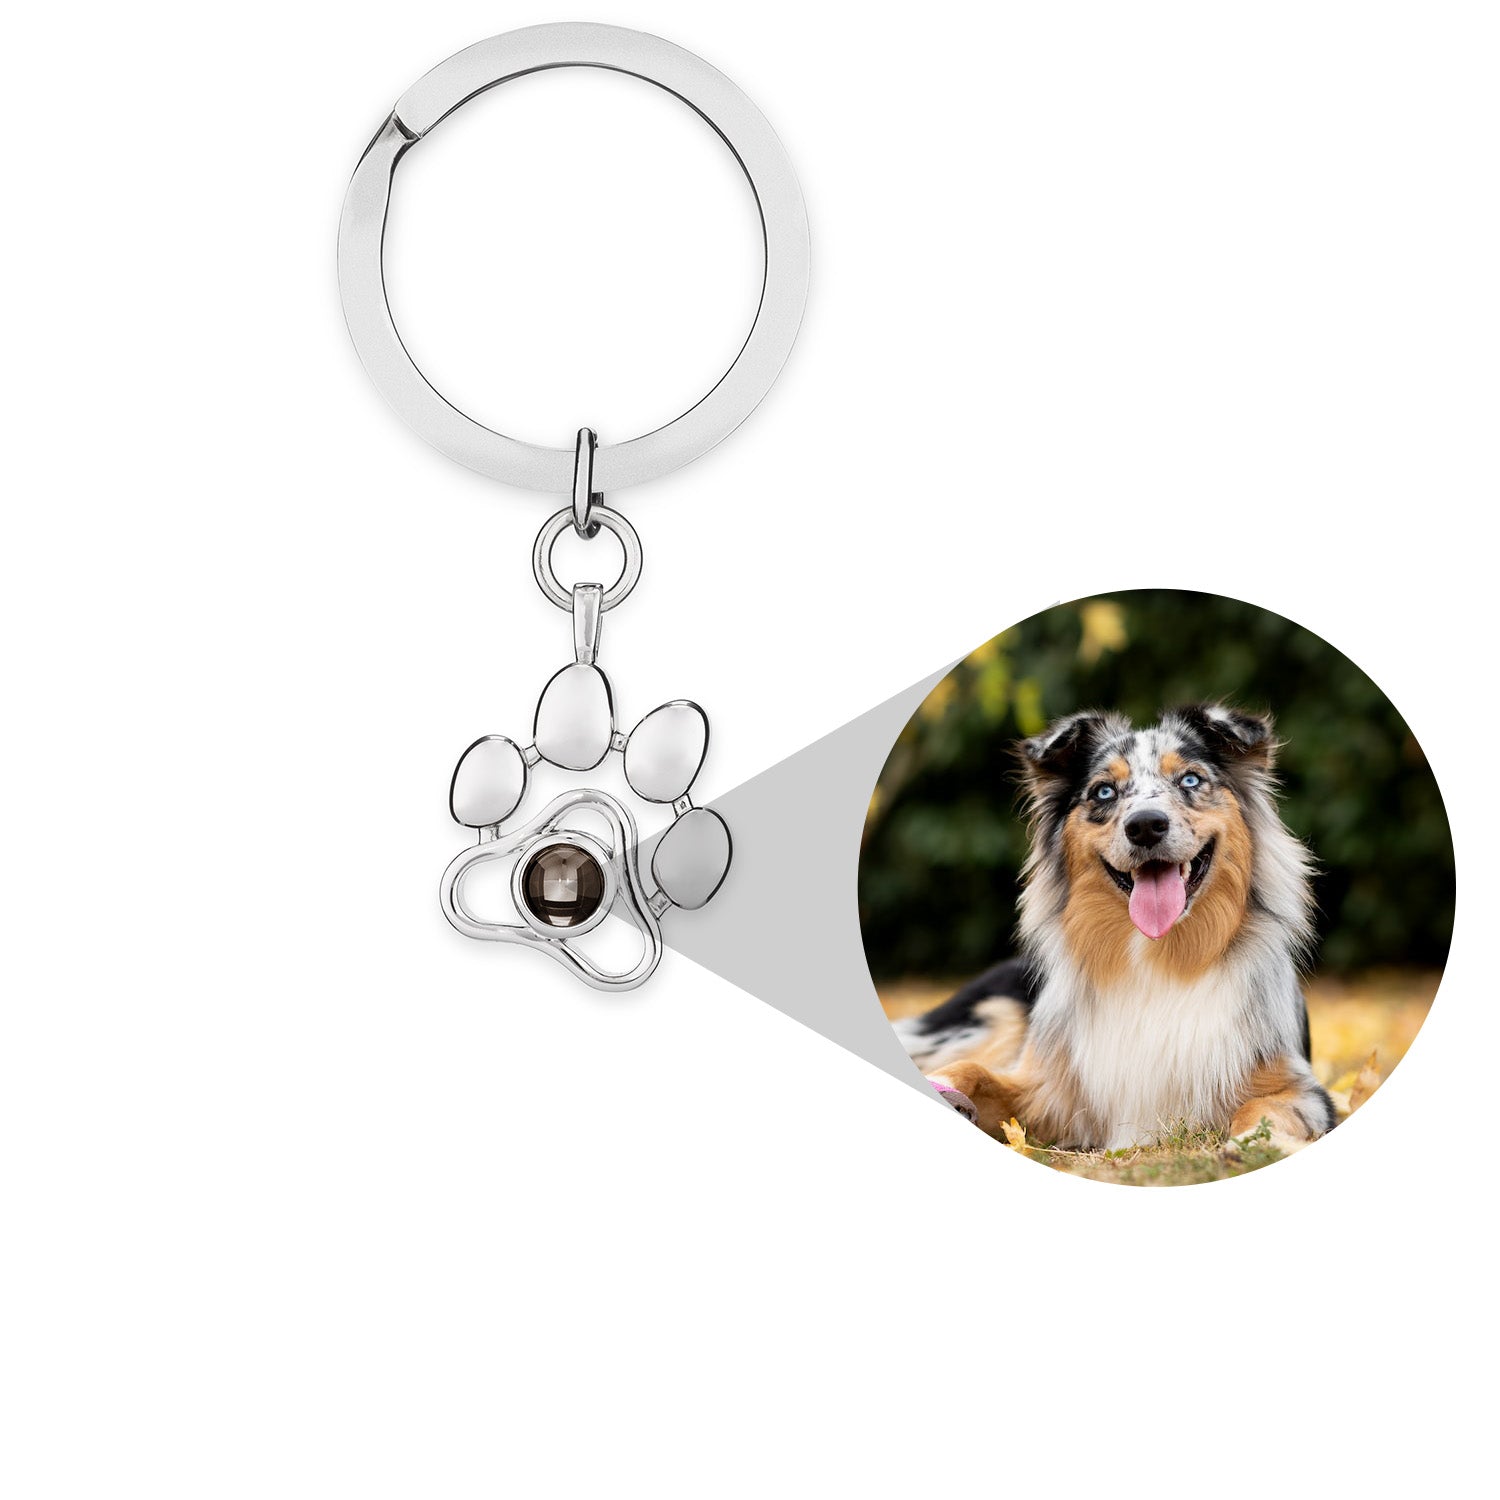 Can I Pet Your Dog? Motel Keychain – Porchlight Design Co.